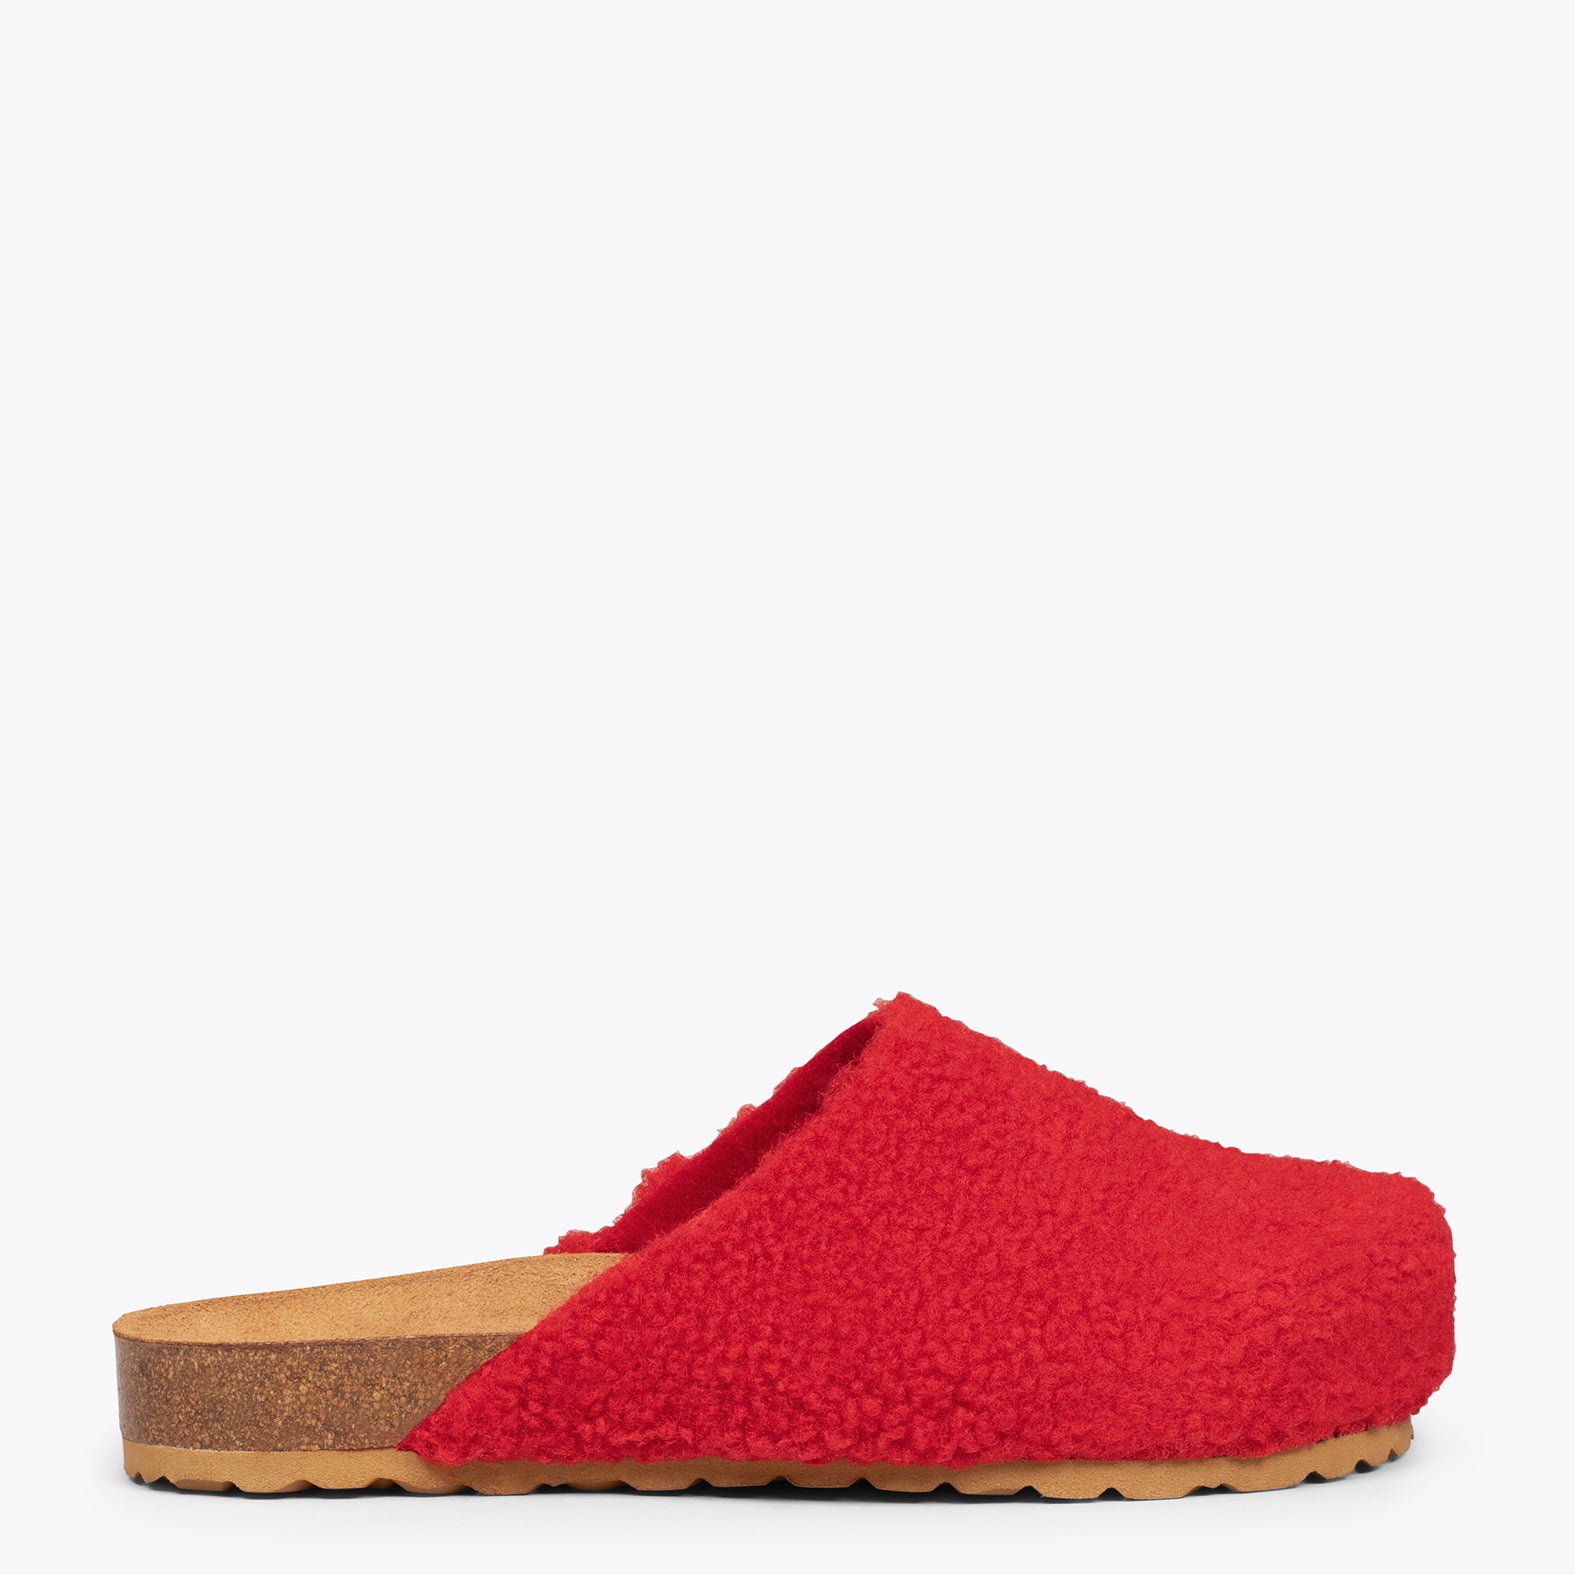 DREAMING - Chaussons fourrure mouton ROUGE